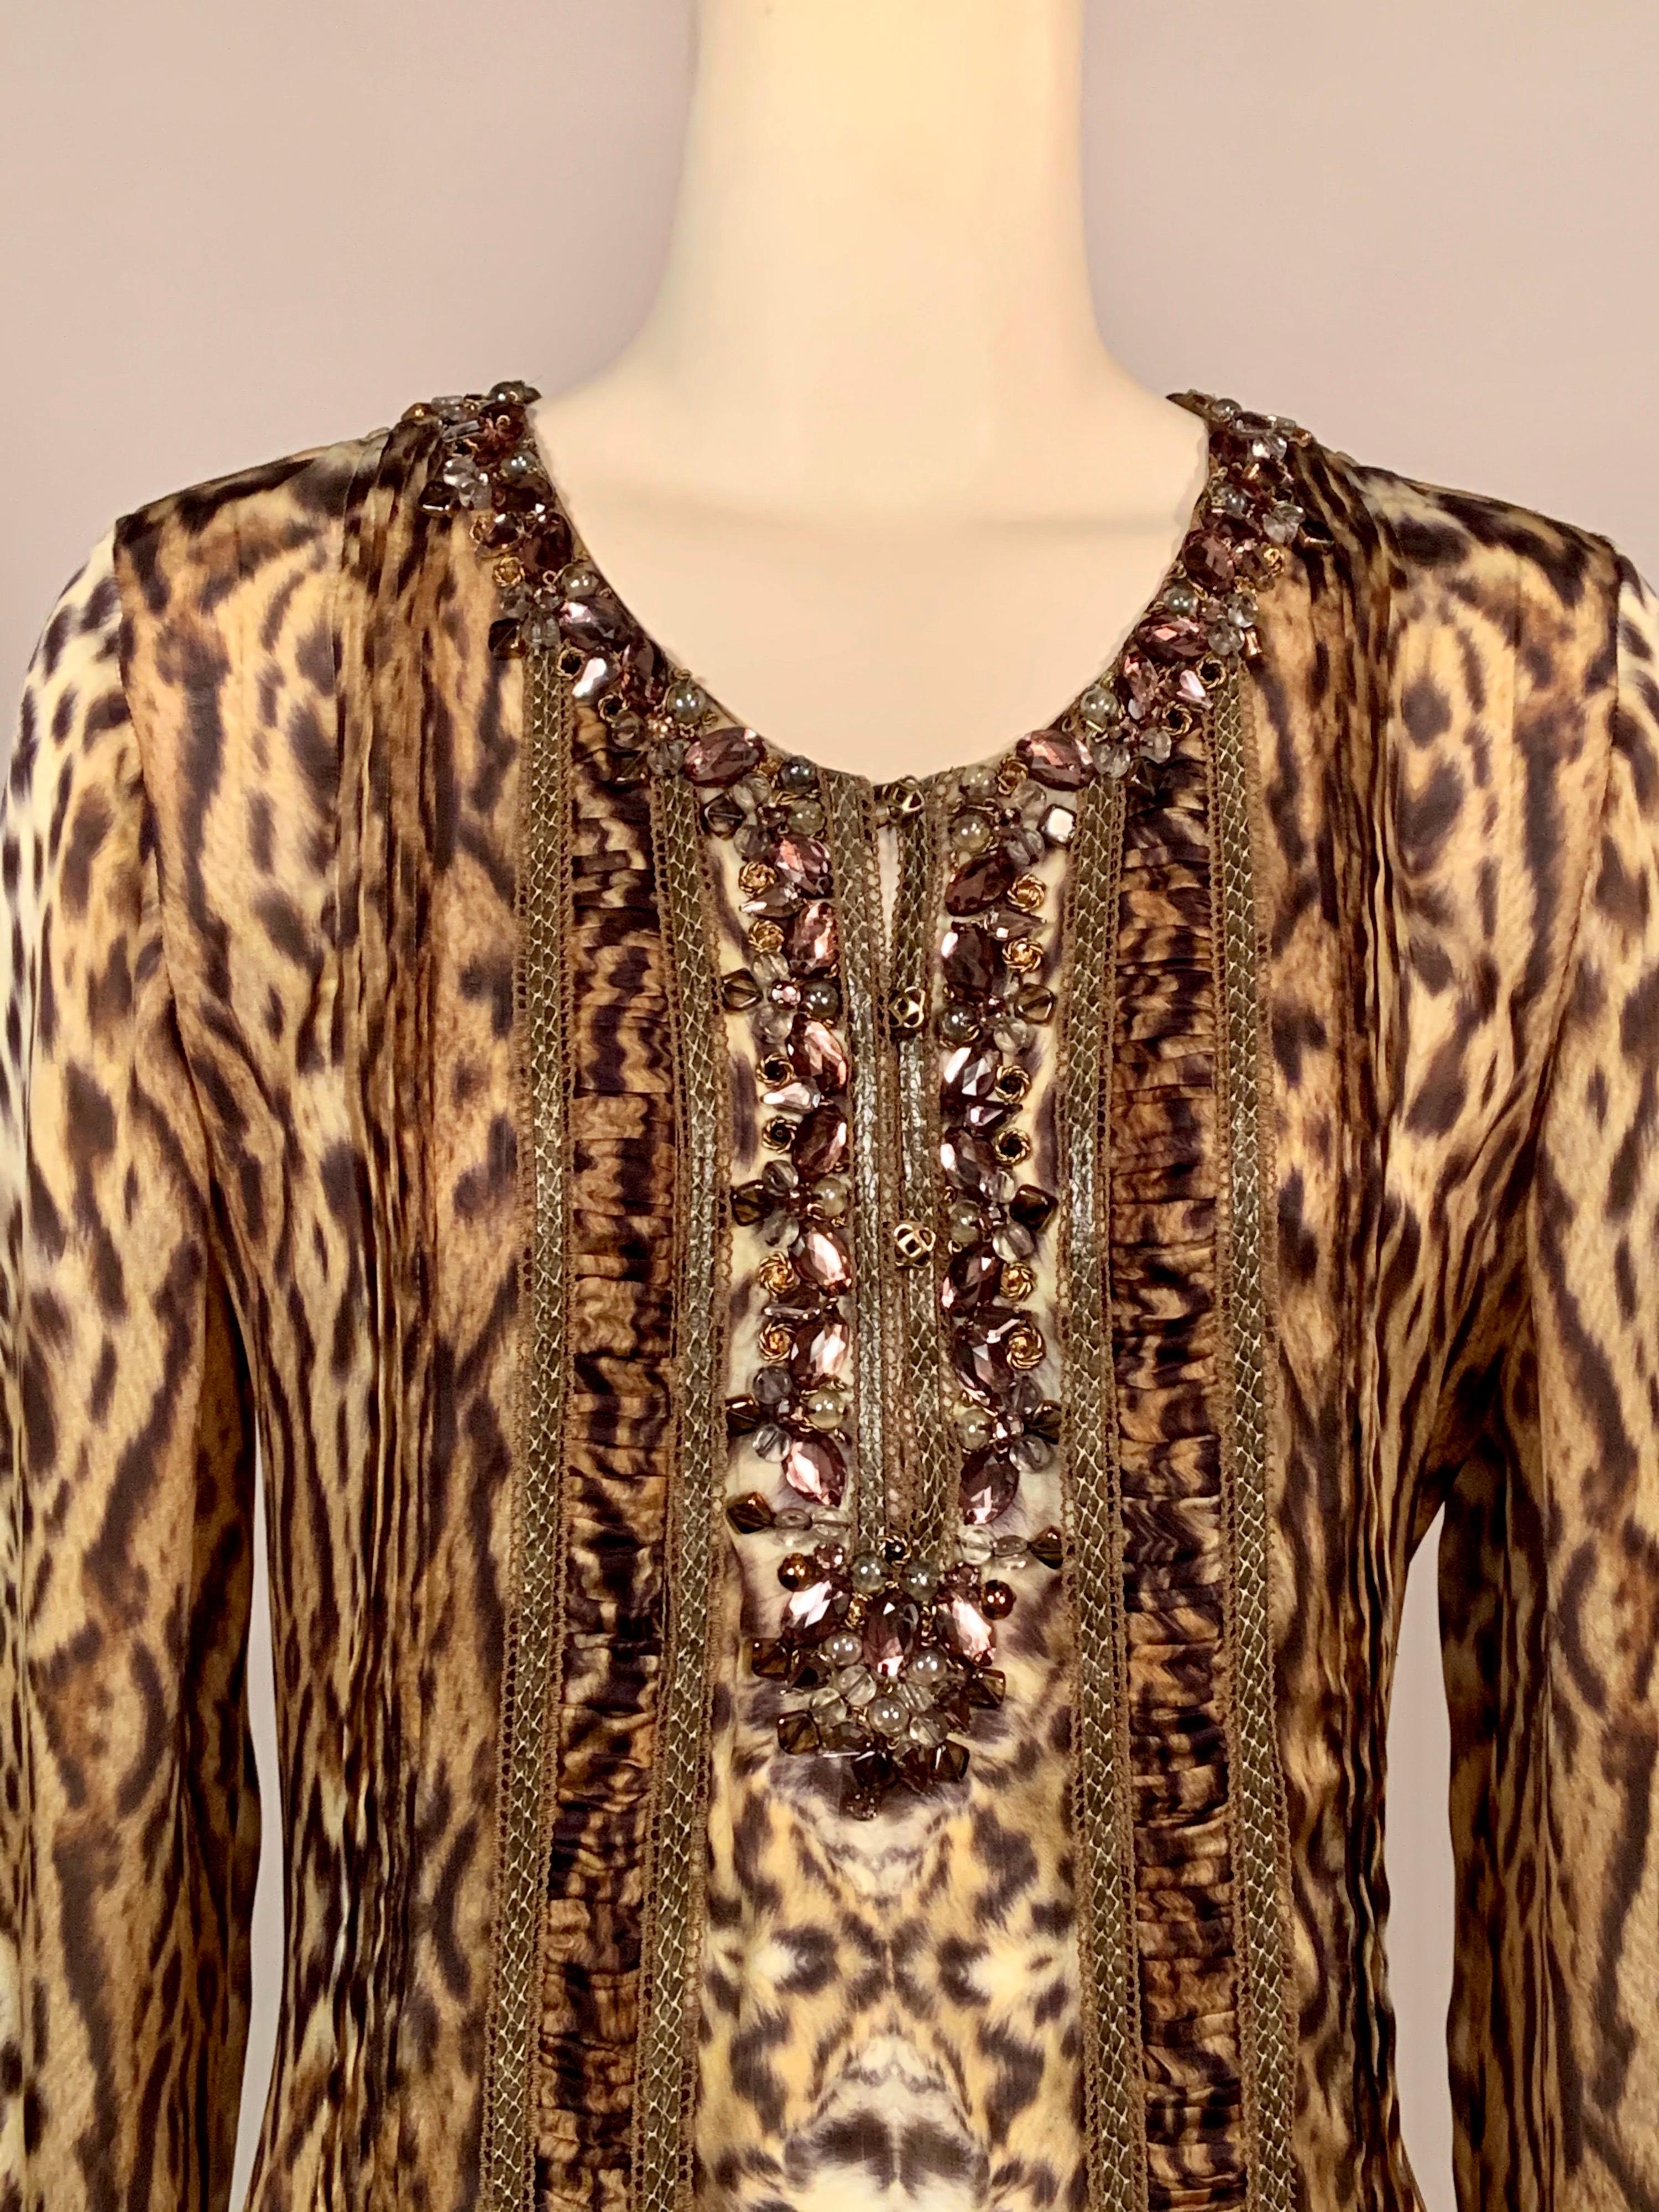 The very best blouse ever!  This stunning animal printed silk chiffon blouse designed by Oscar de la Renta has a lavish collar and bib front hand sewn with layered jewels in all shapes and sizes and many beautiful colors.  If that is not enough the